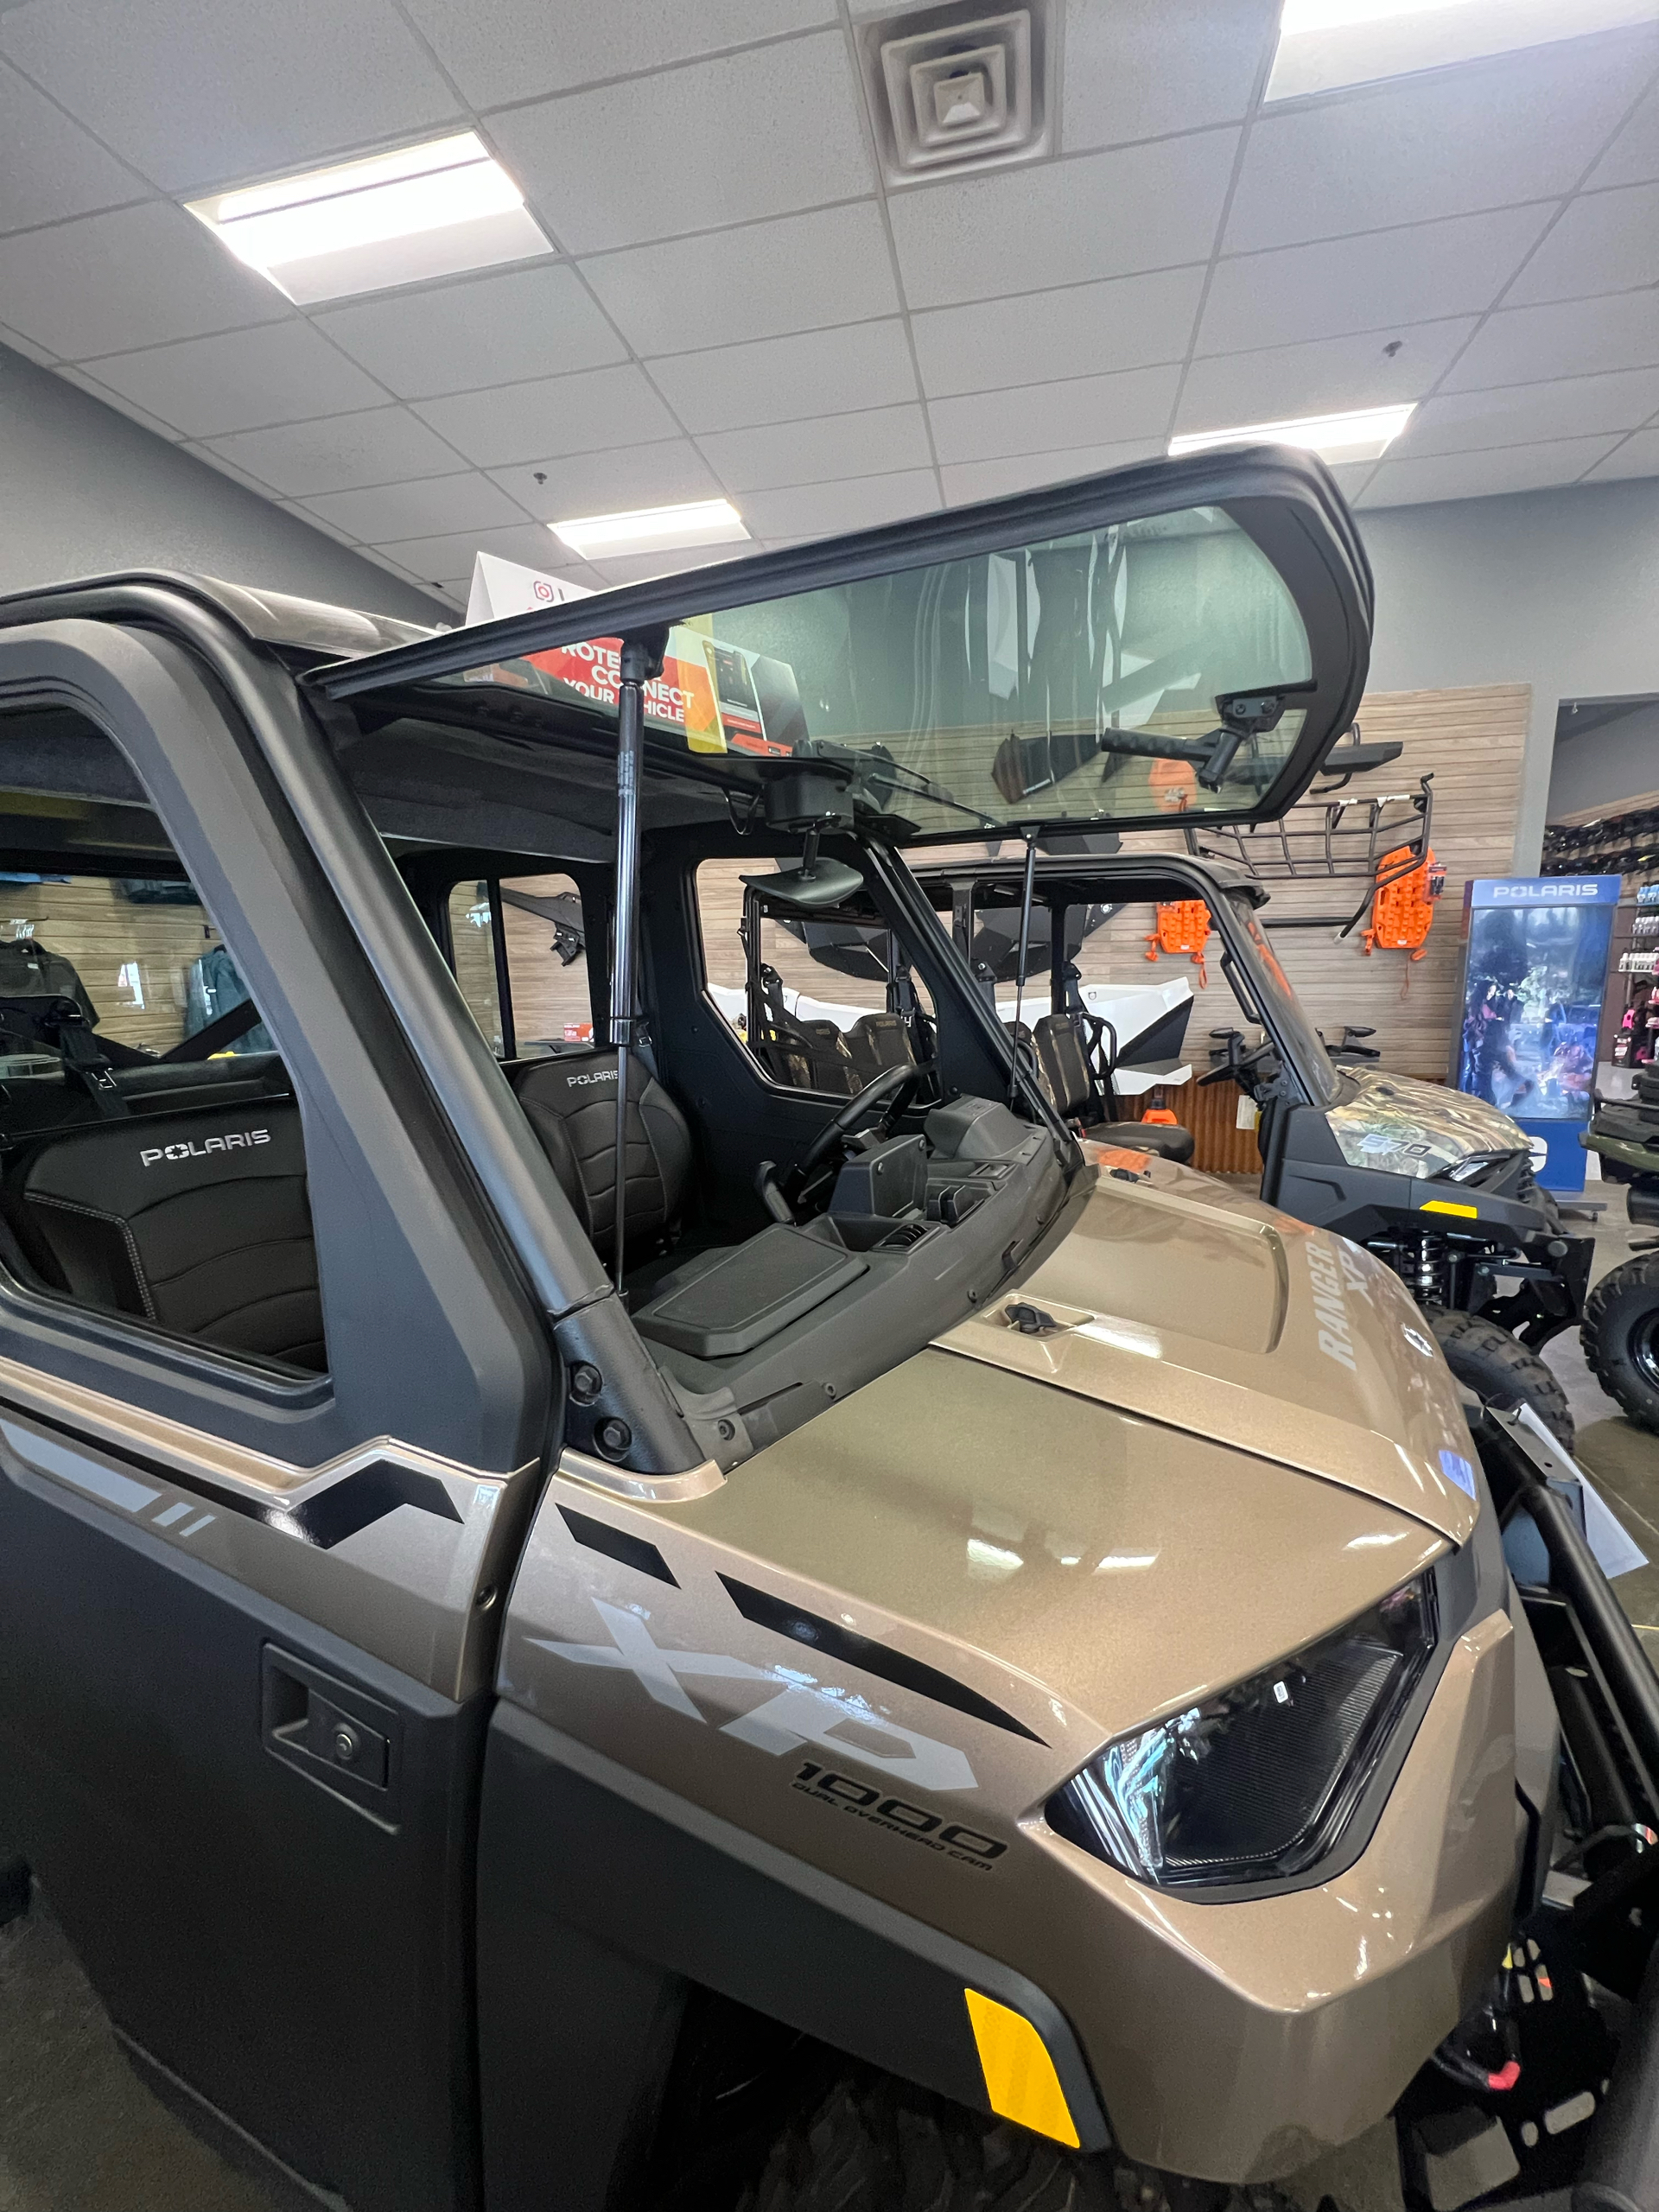 2023 Polaris Ranger Crew XP 1000 NorthStar Edition Ultimate - Ride Command Package in Elk Grove, California - Photo 7